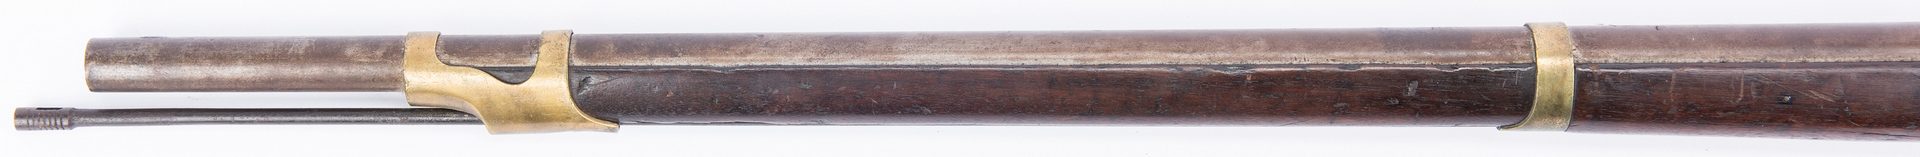 Lot 370: Model 1841 Windsor "Mississippi" Contract Rifle